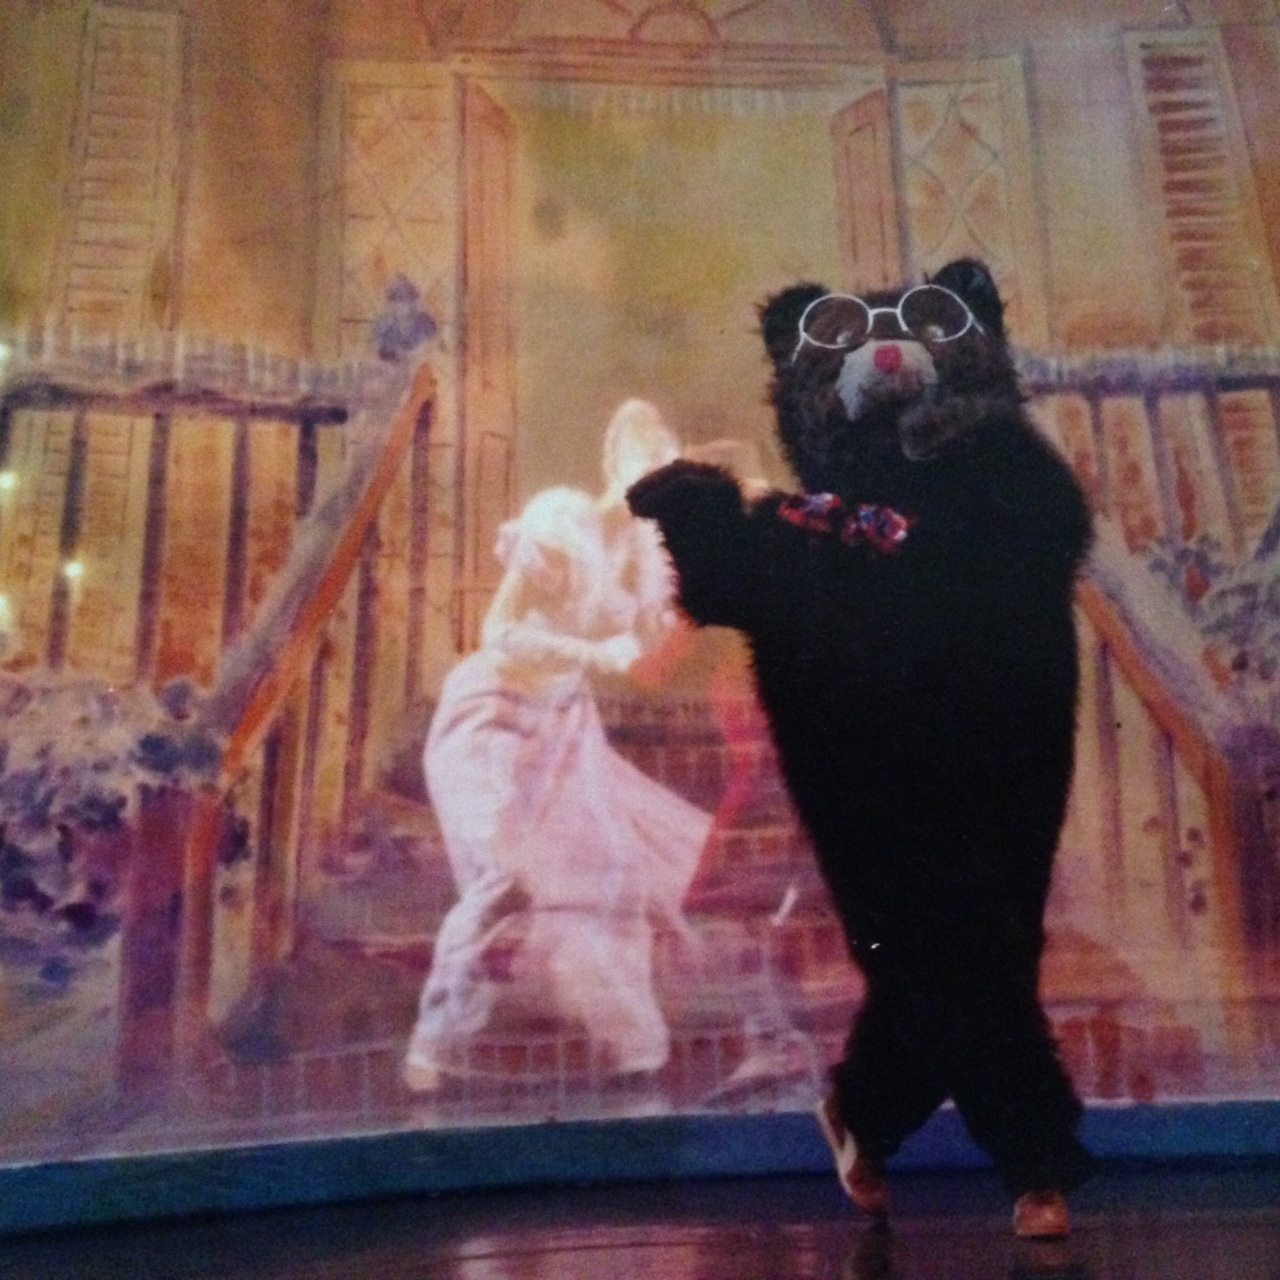 A dancing bear on stage